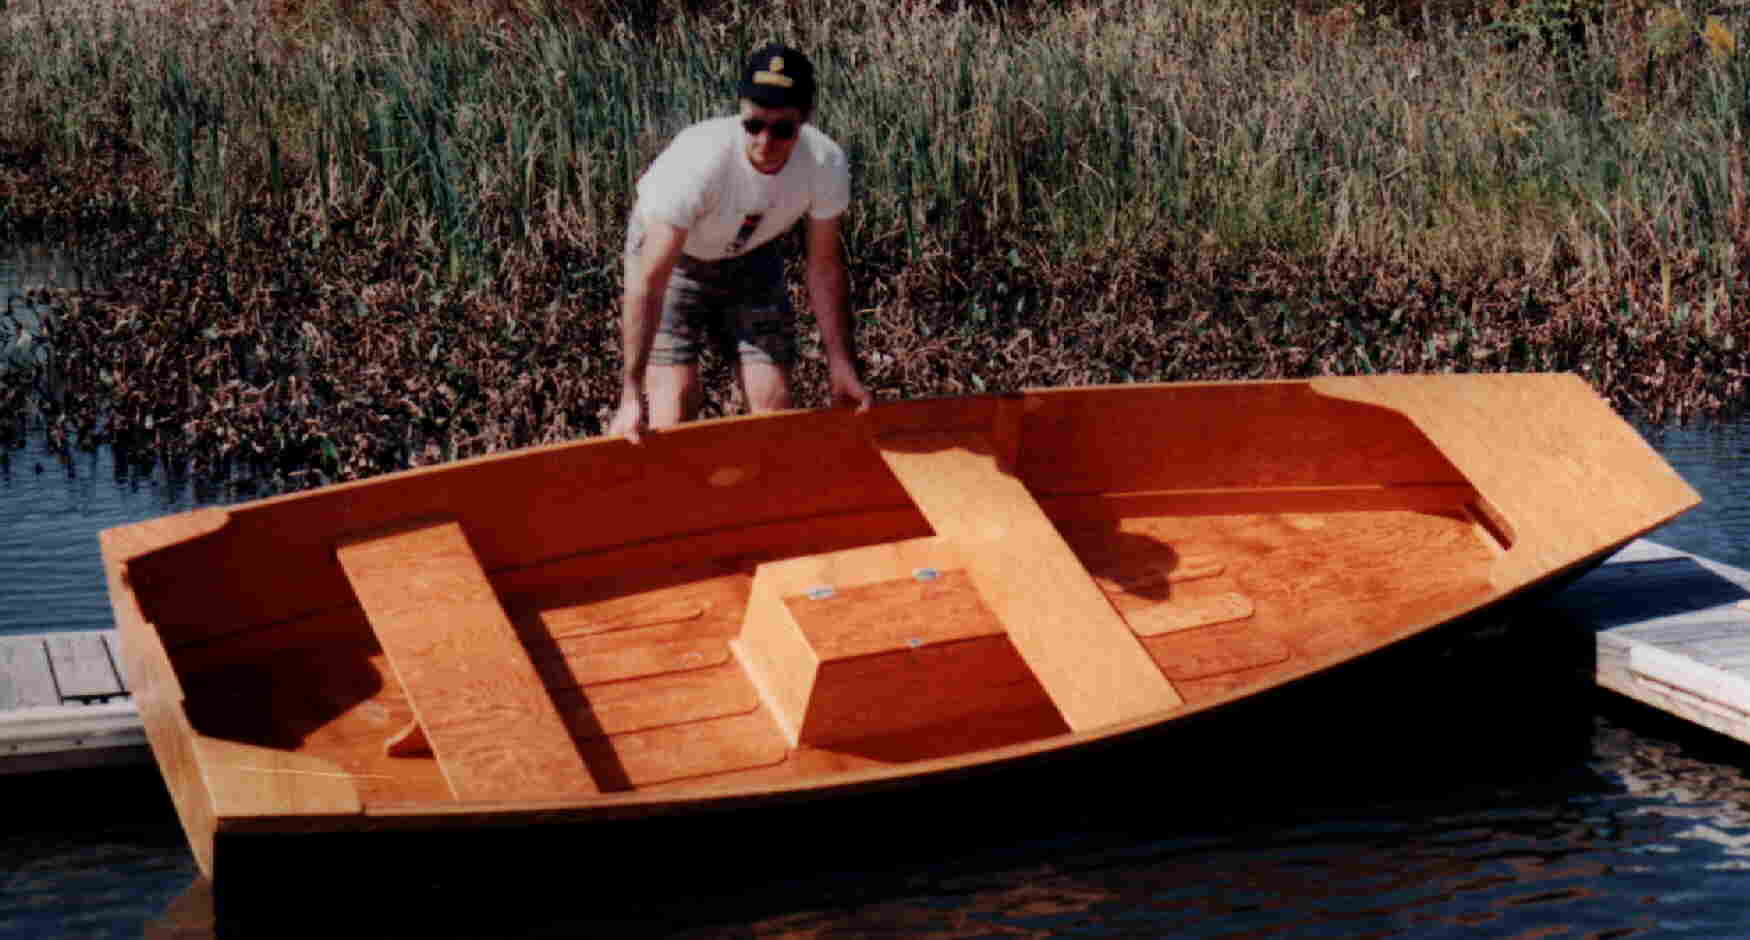 Nerlana: For you One man plywood boat plans